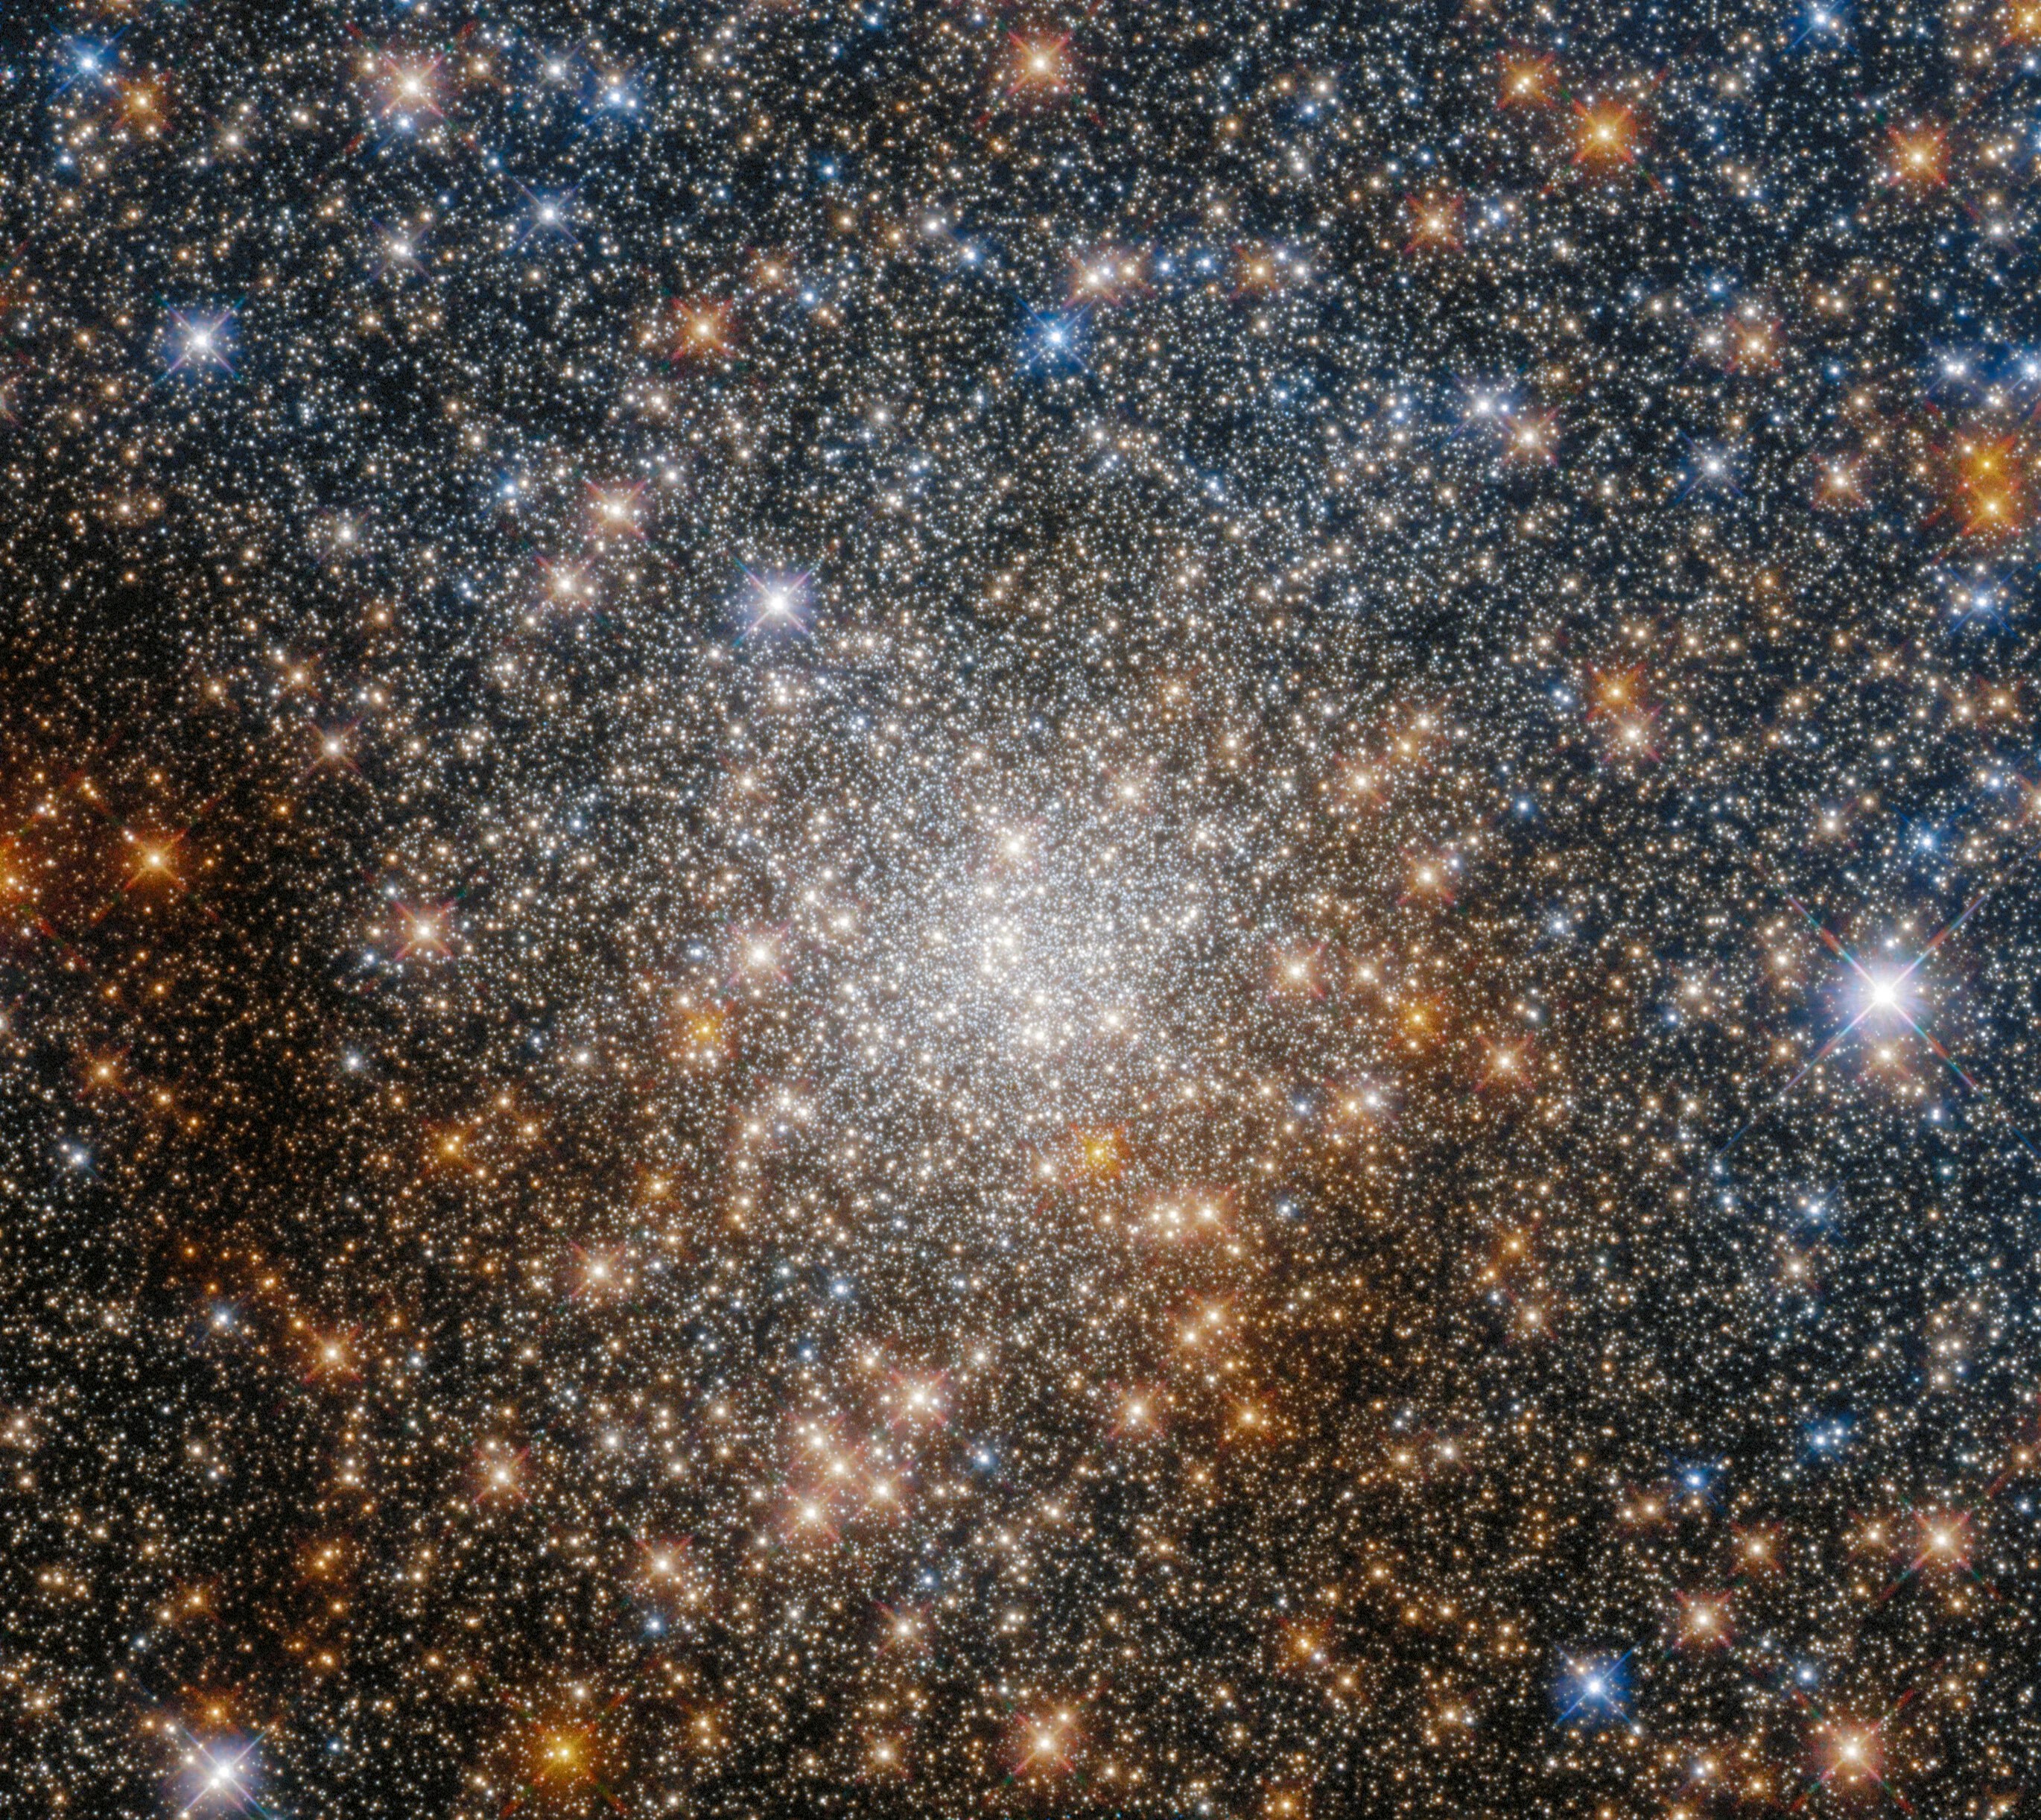 Bright-white stars dot the entire scene but are concentrated at the center of the image. gold stars dot periphery with more filling the bottom half of the image. a smattering of blue-white stars with most in the upper half of the image.